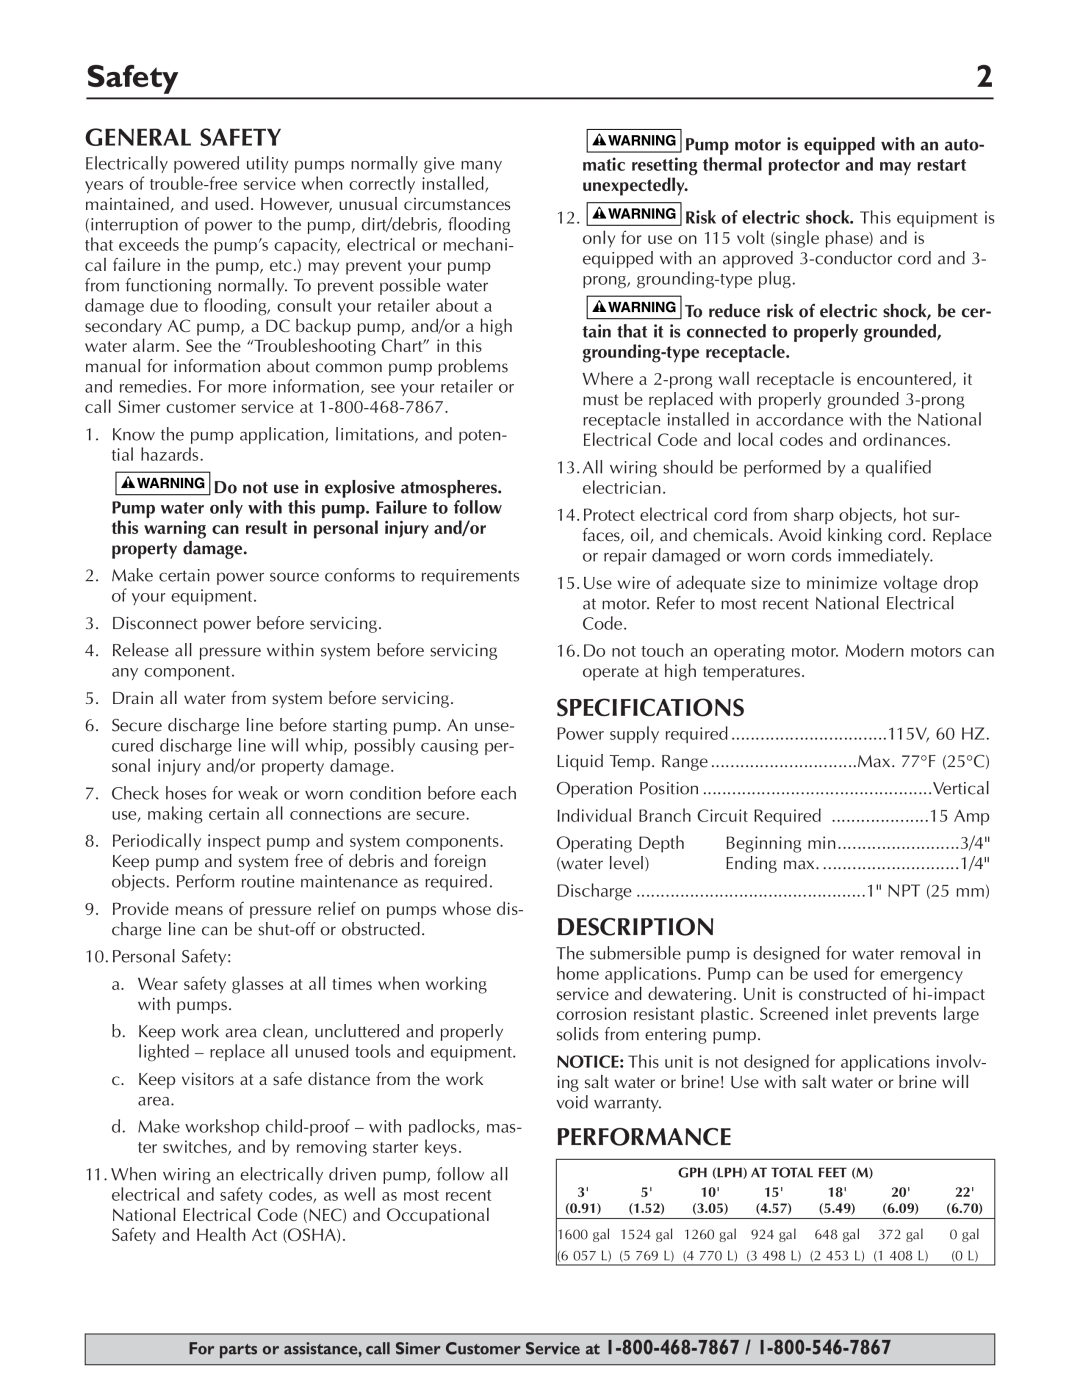 Simer Pumps 2330-03 owner manual General Safety, Specifications, Description, Performance 